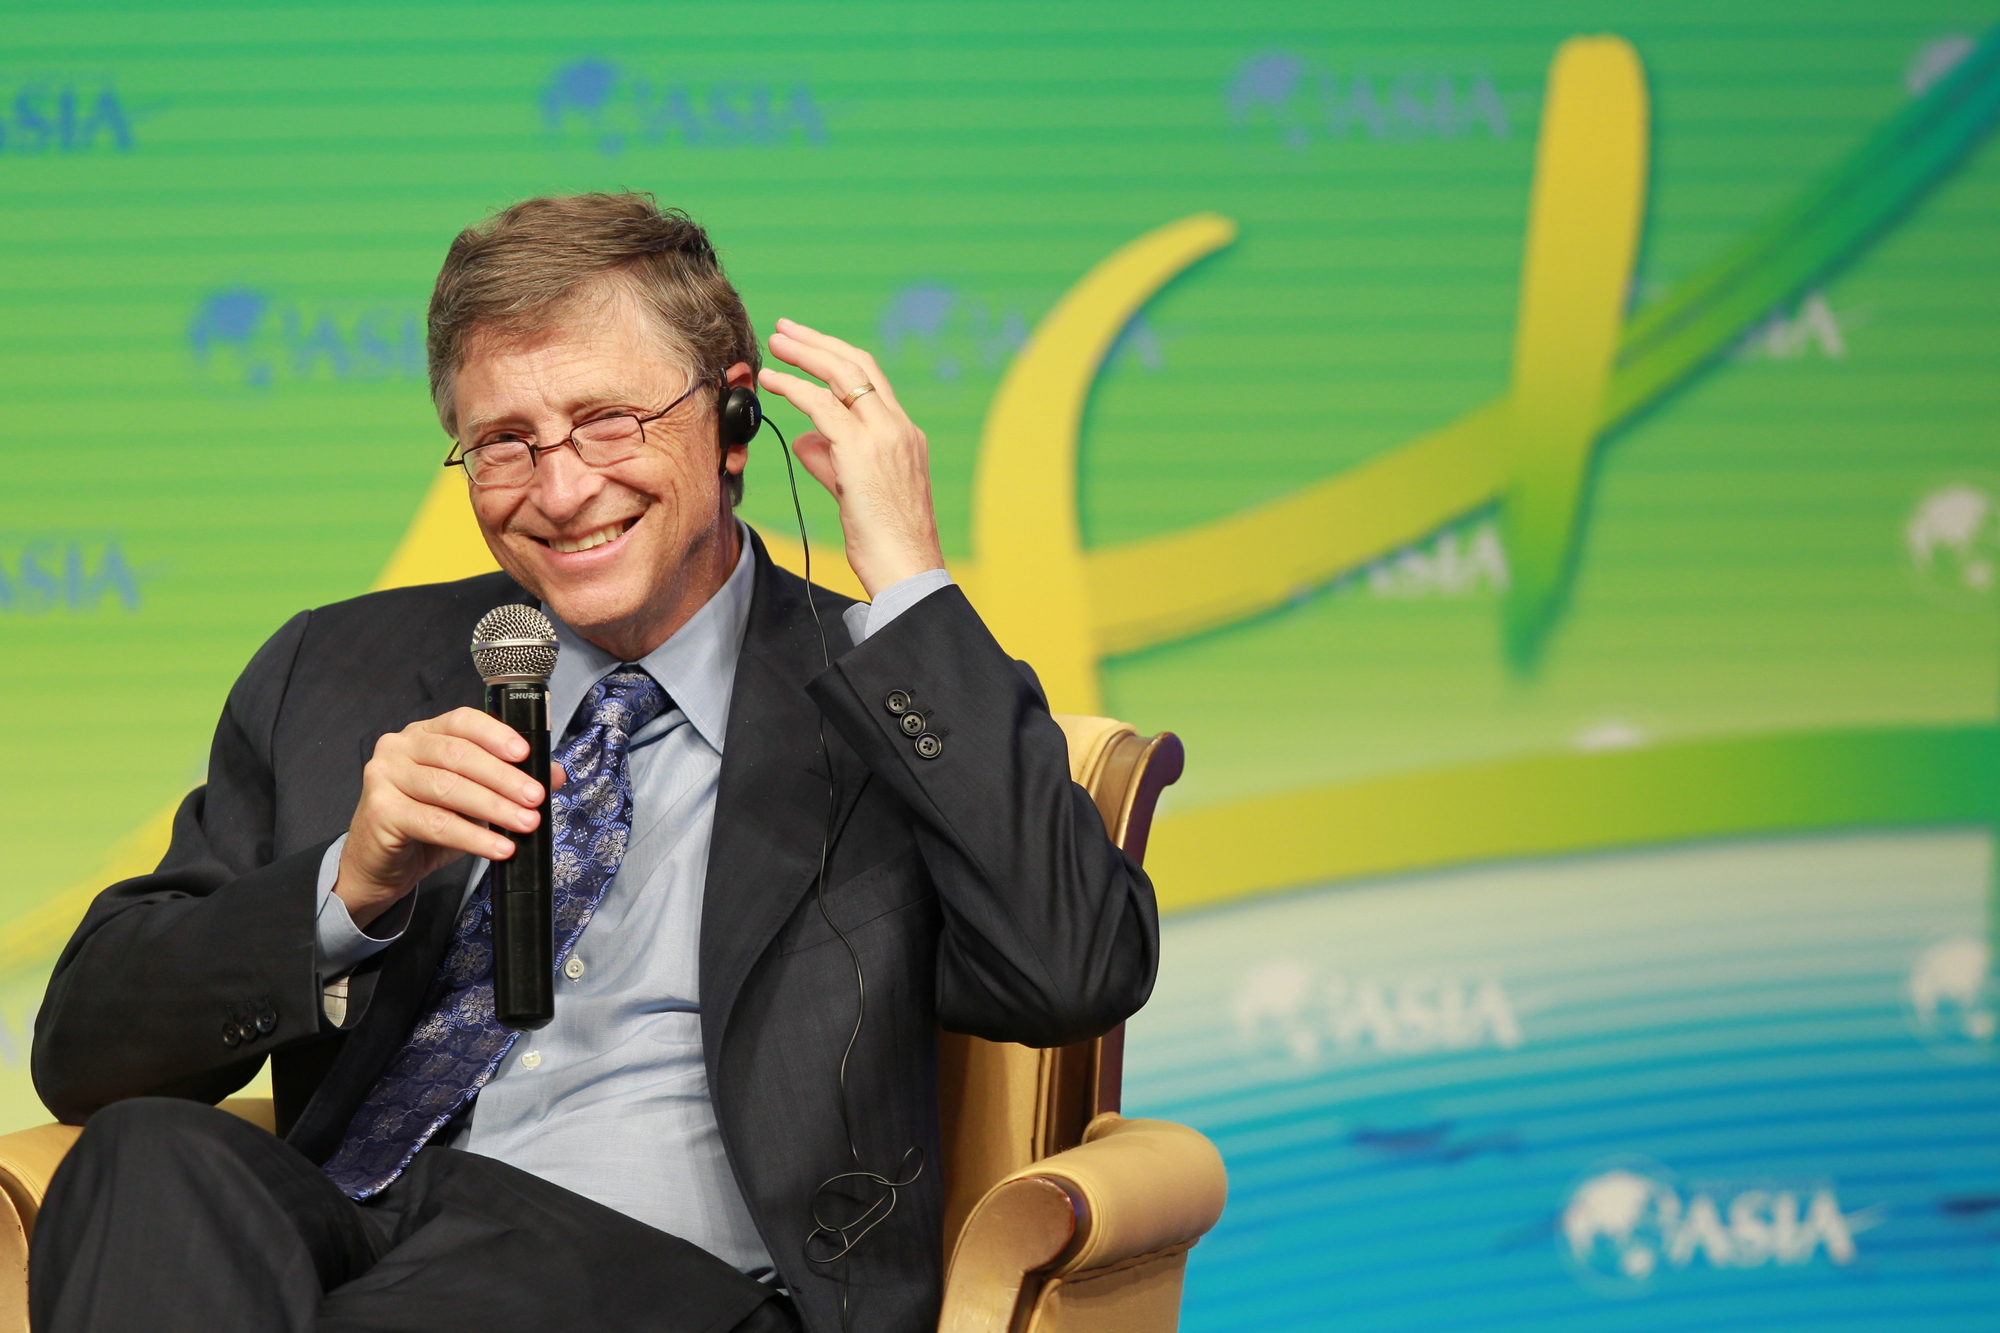 Bill Gates, Co-Chair of the Bill and Melinda Gates Foundation, talks at a sub-forum during the 2013 Boao Forum for Asia in Boao town, Qionghai city, south Chinas Hainan province, 6 April 2013.